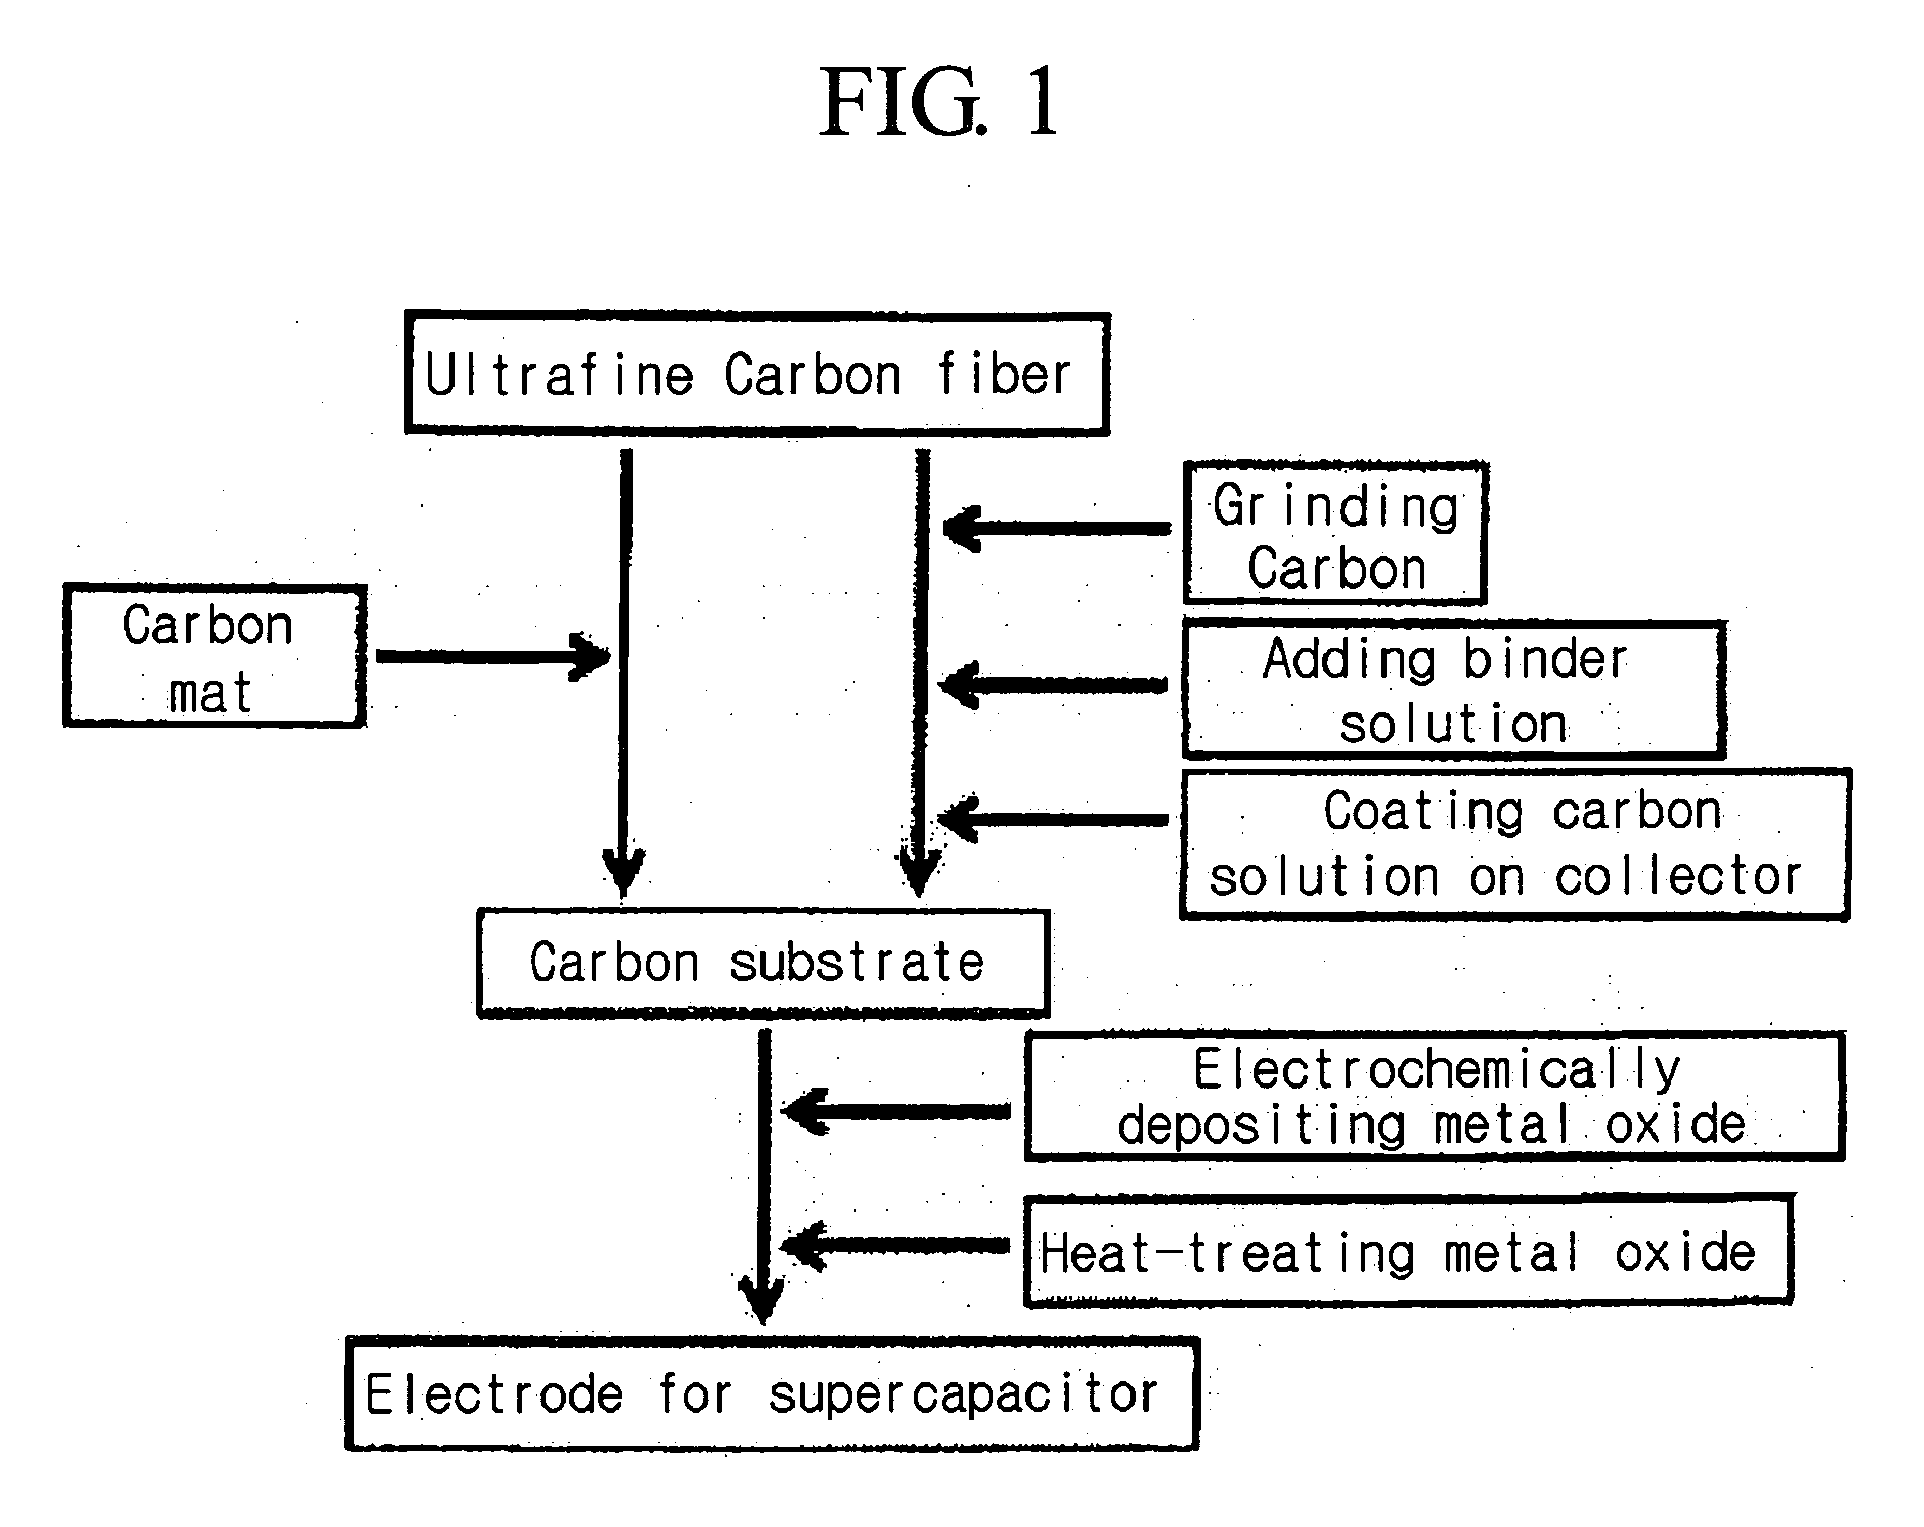 Electrode for supercapacitor having metal oxide deposited on ultrafine carbon fiber and the fabrication method thereof